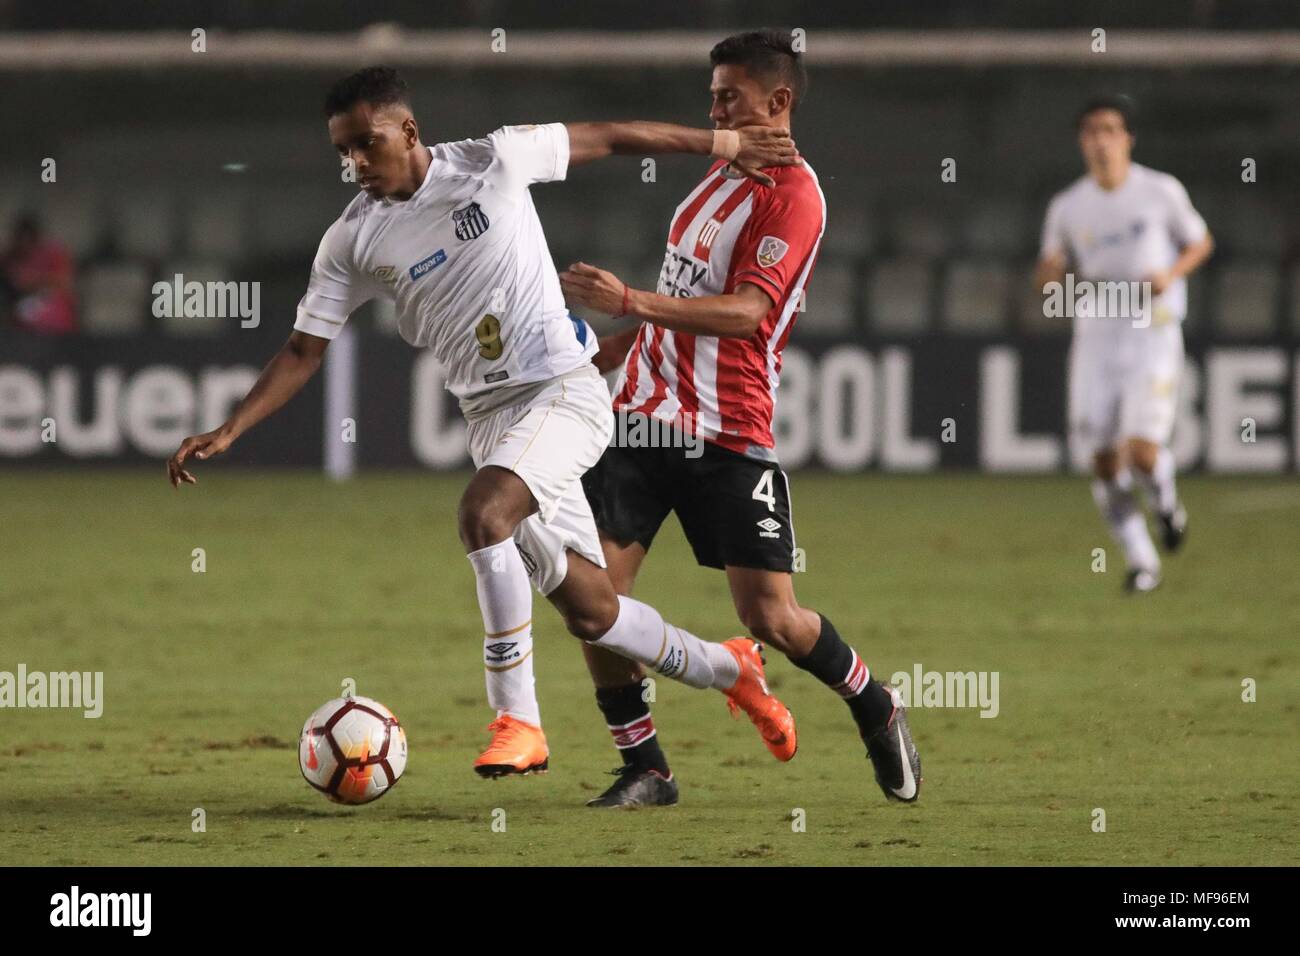 Santos, Brazil. 24th Apr, 2018. Rodrygo and Gomez during the match between Santos and Estudiantes (Argentina) held at Vila Belmiro Stadium in Santos, SP. The match is valid for the 4th round of Group 6 of the 2018 Copa Libertadores. Credit: Ricardo Moreira/FotoArena/Alamy Live News Stock Photo